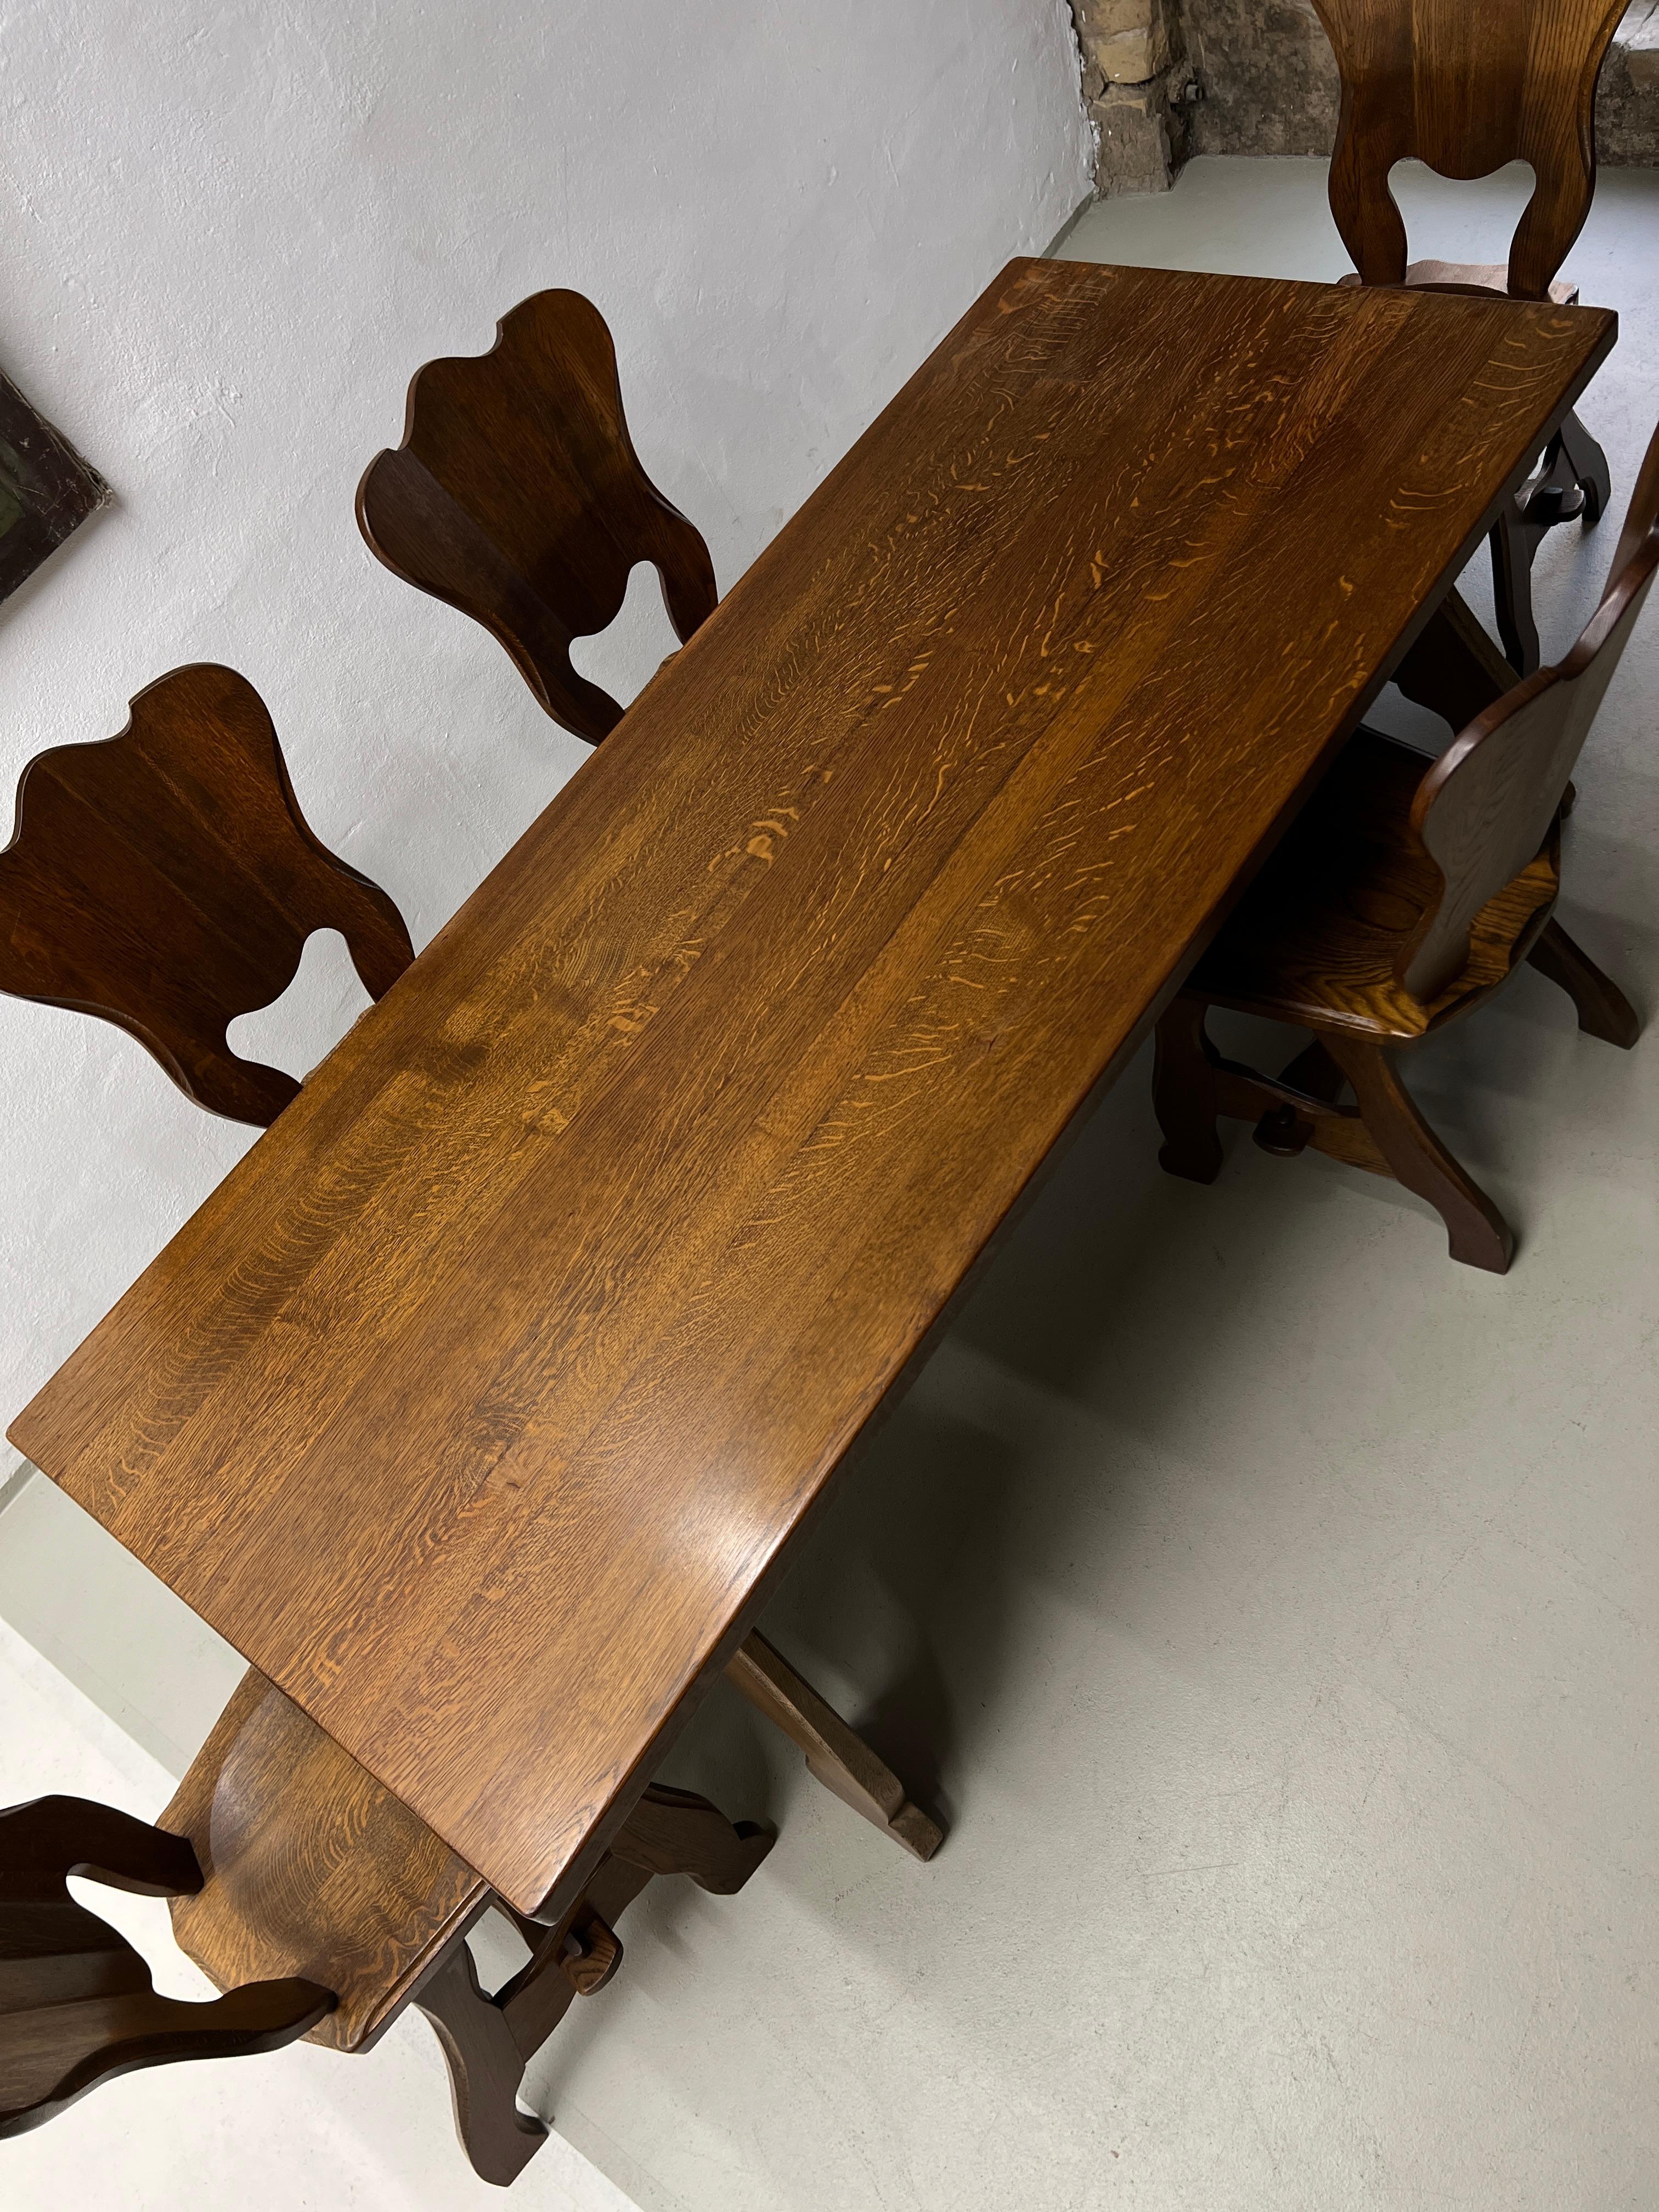 Brutalist Oak Dining Table Set with Six Chairs, Netherlands, 1970s For Sale 5